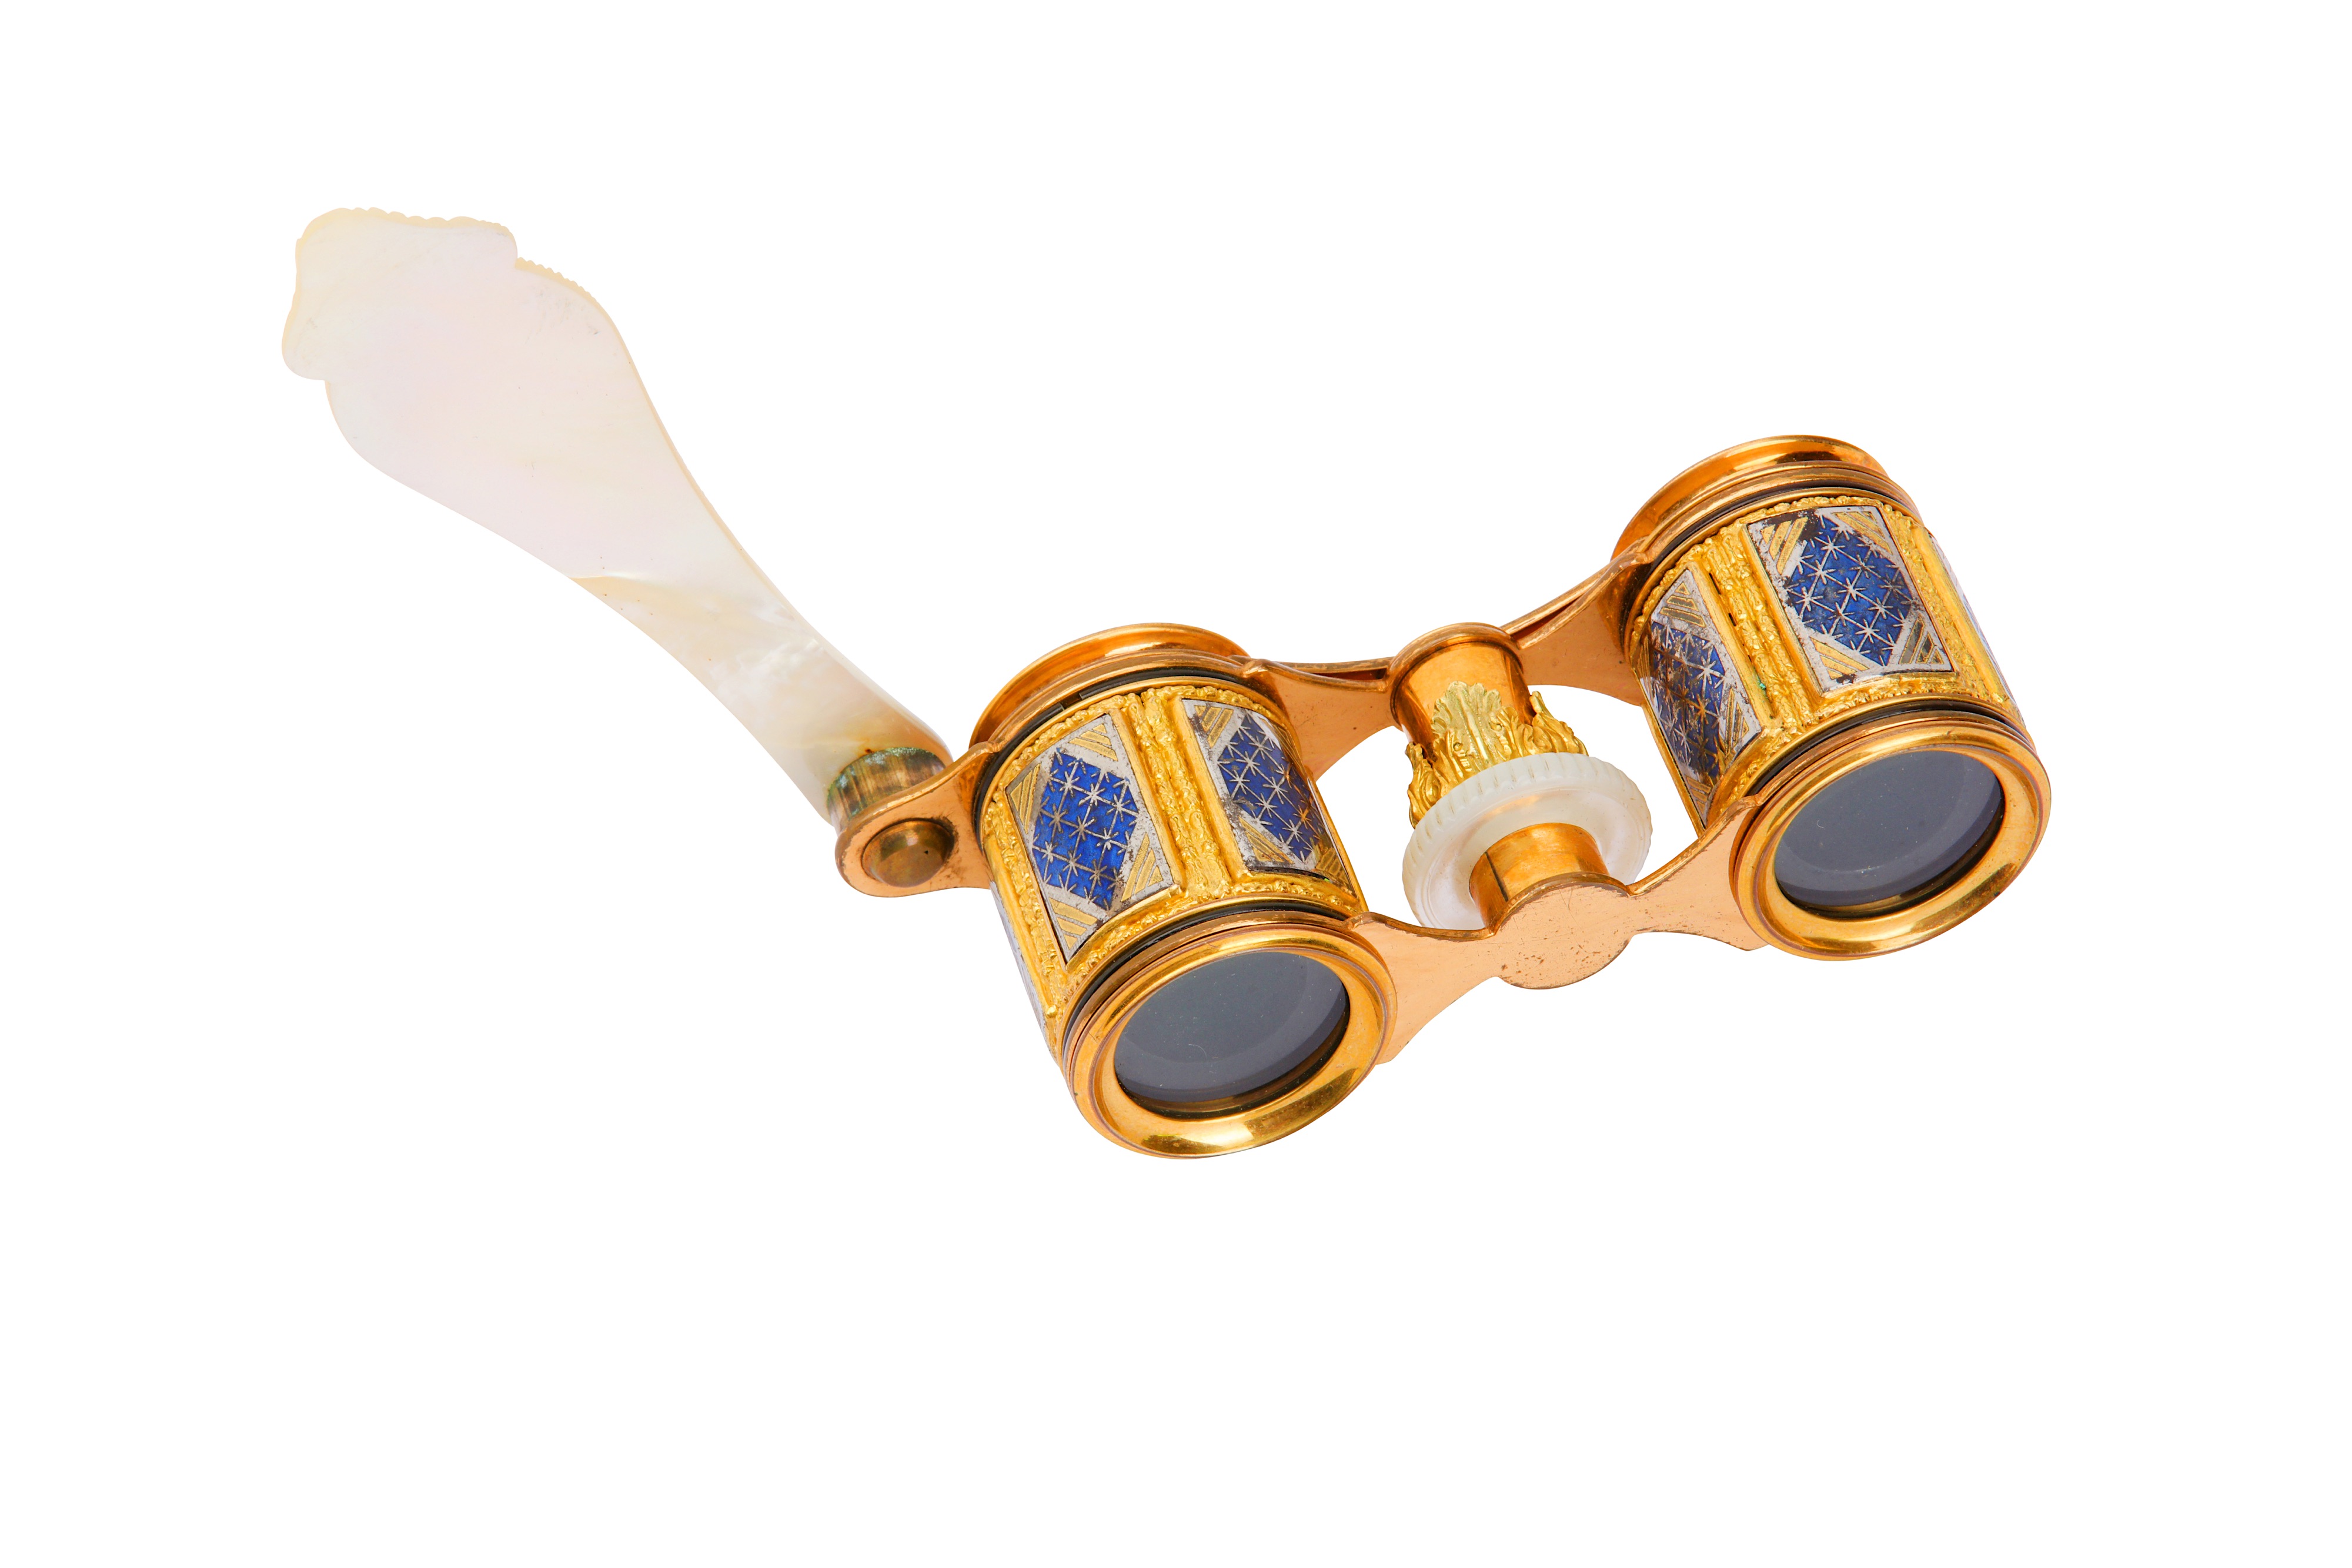 A cased pair of early 19th century gilt metal, mother of pearl and enamel opera glasses, circa 1830